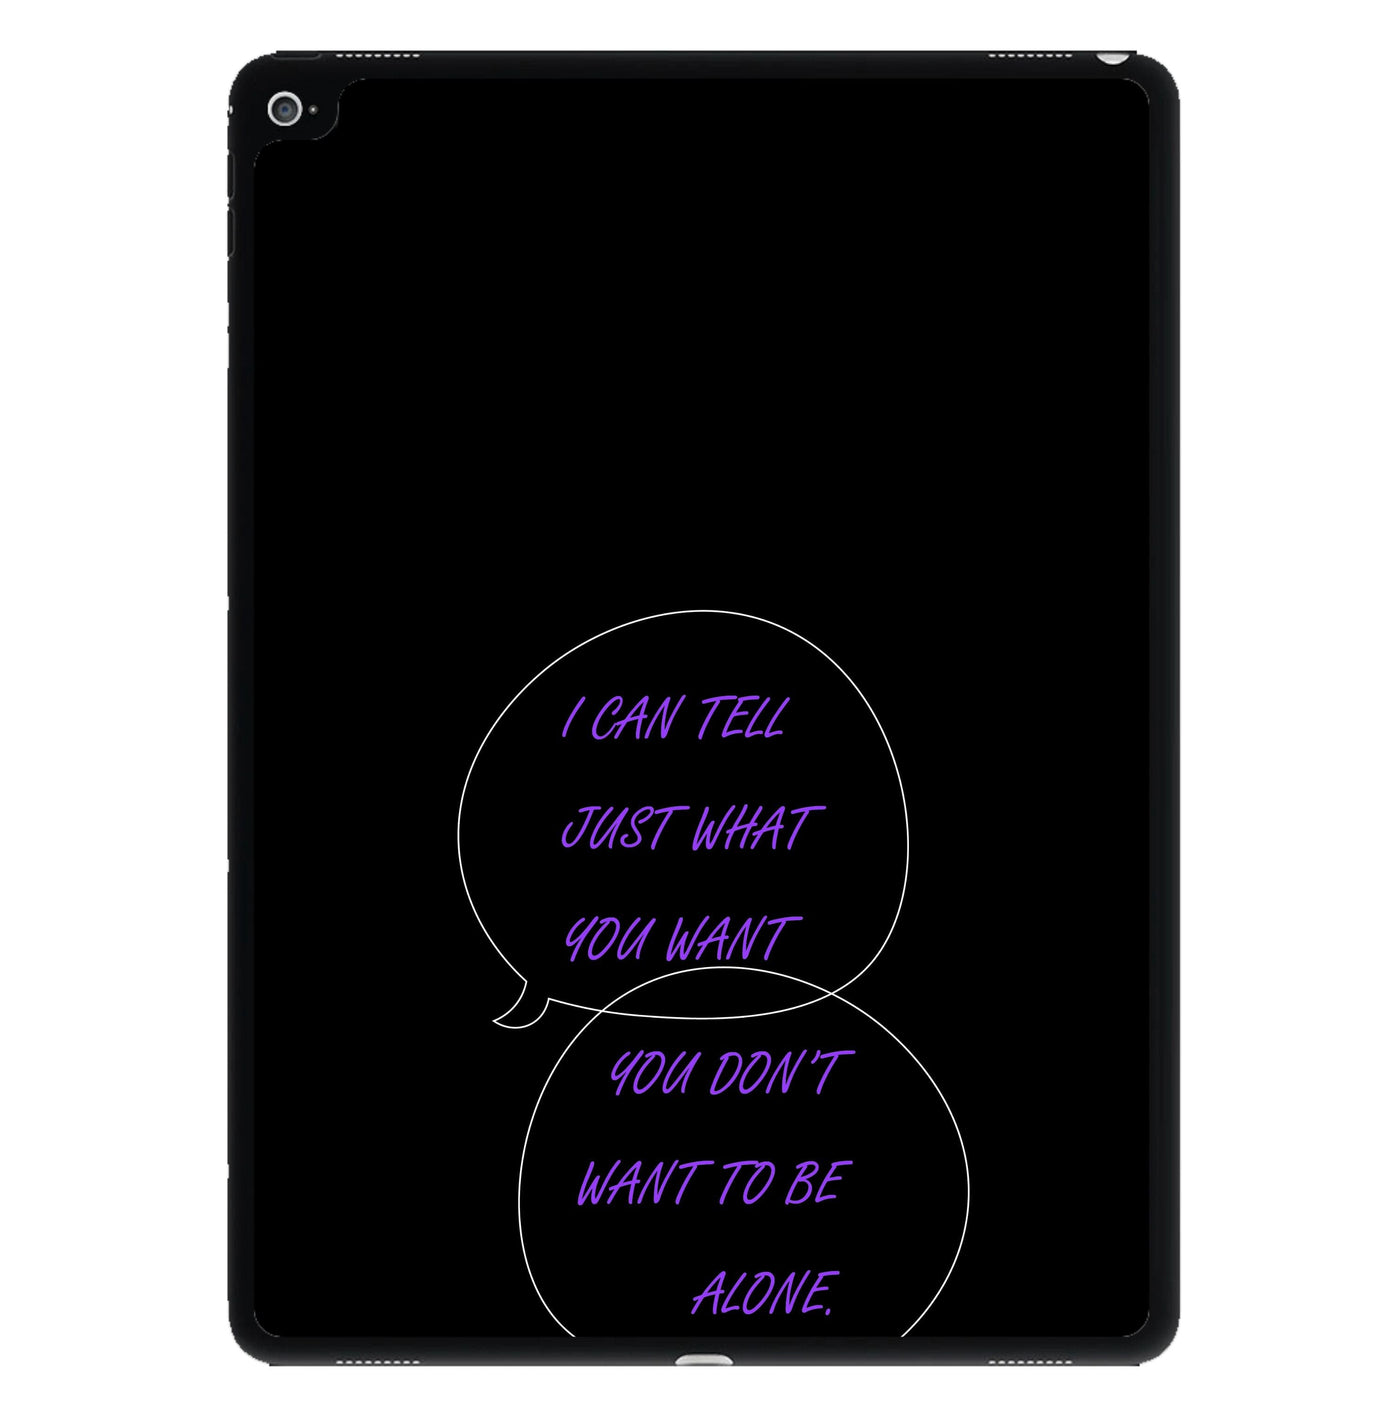 You Don't Want To Be Alone - Festival iPad Case